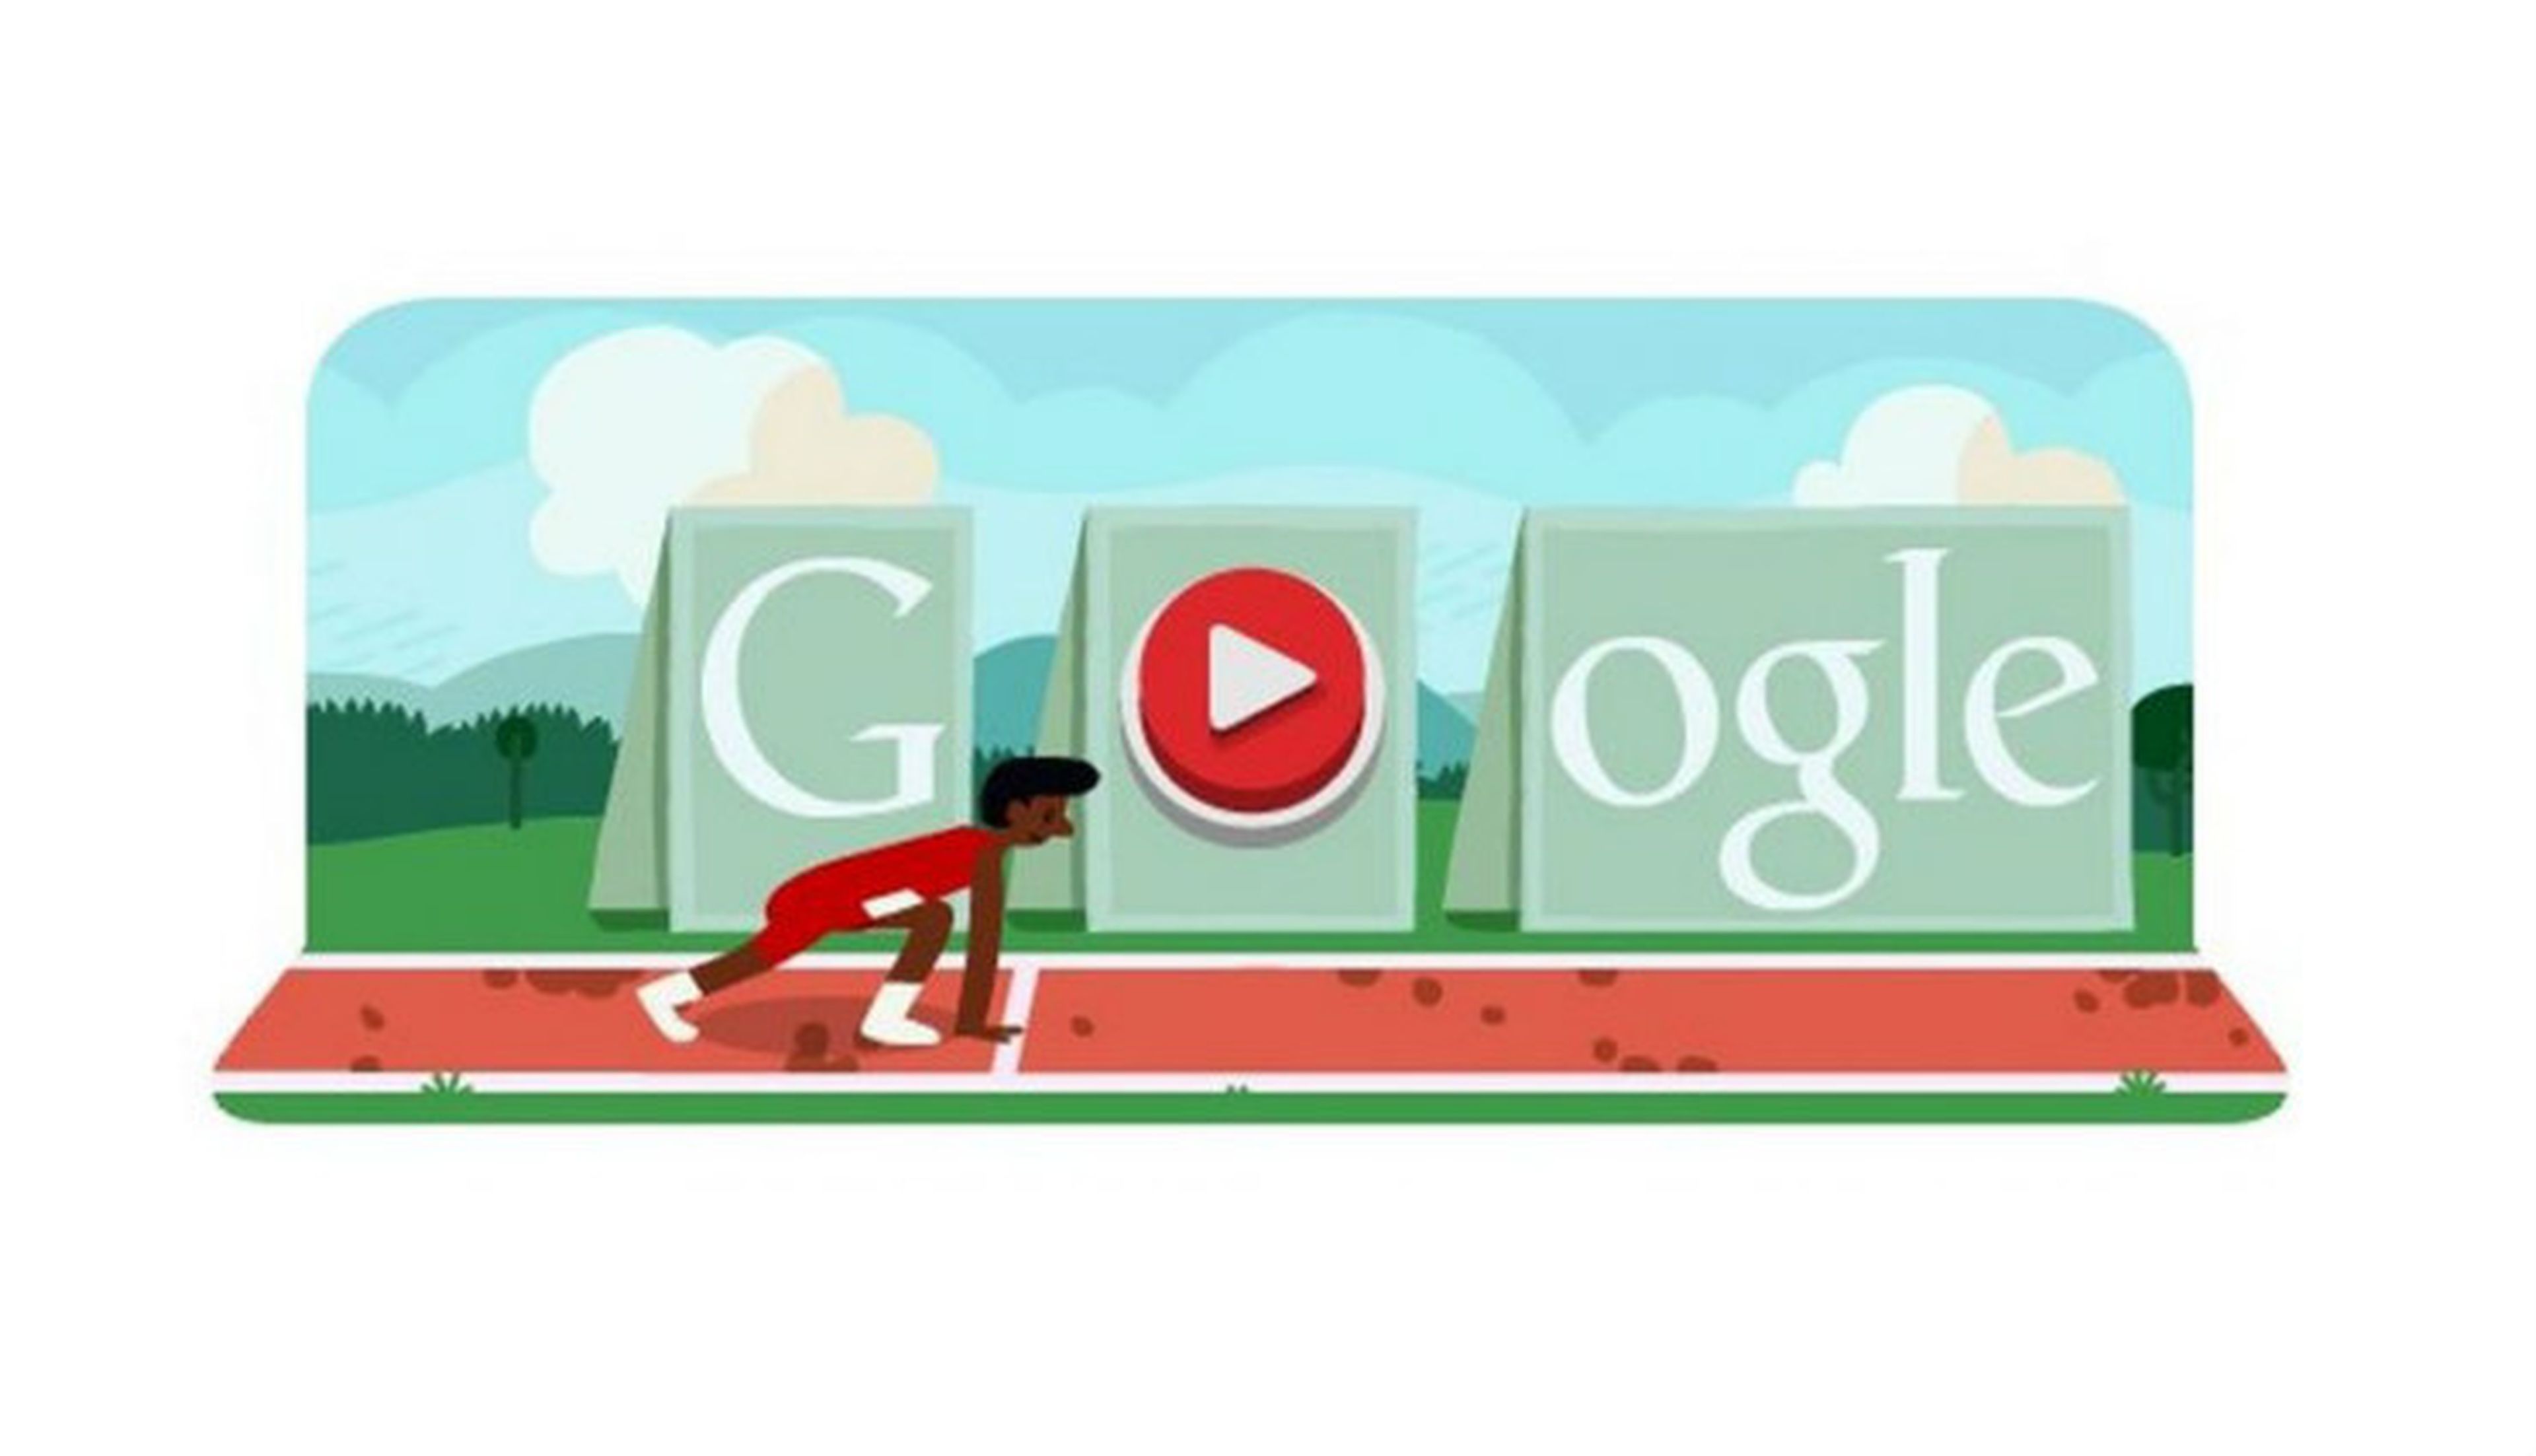 doodle atletismo